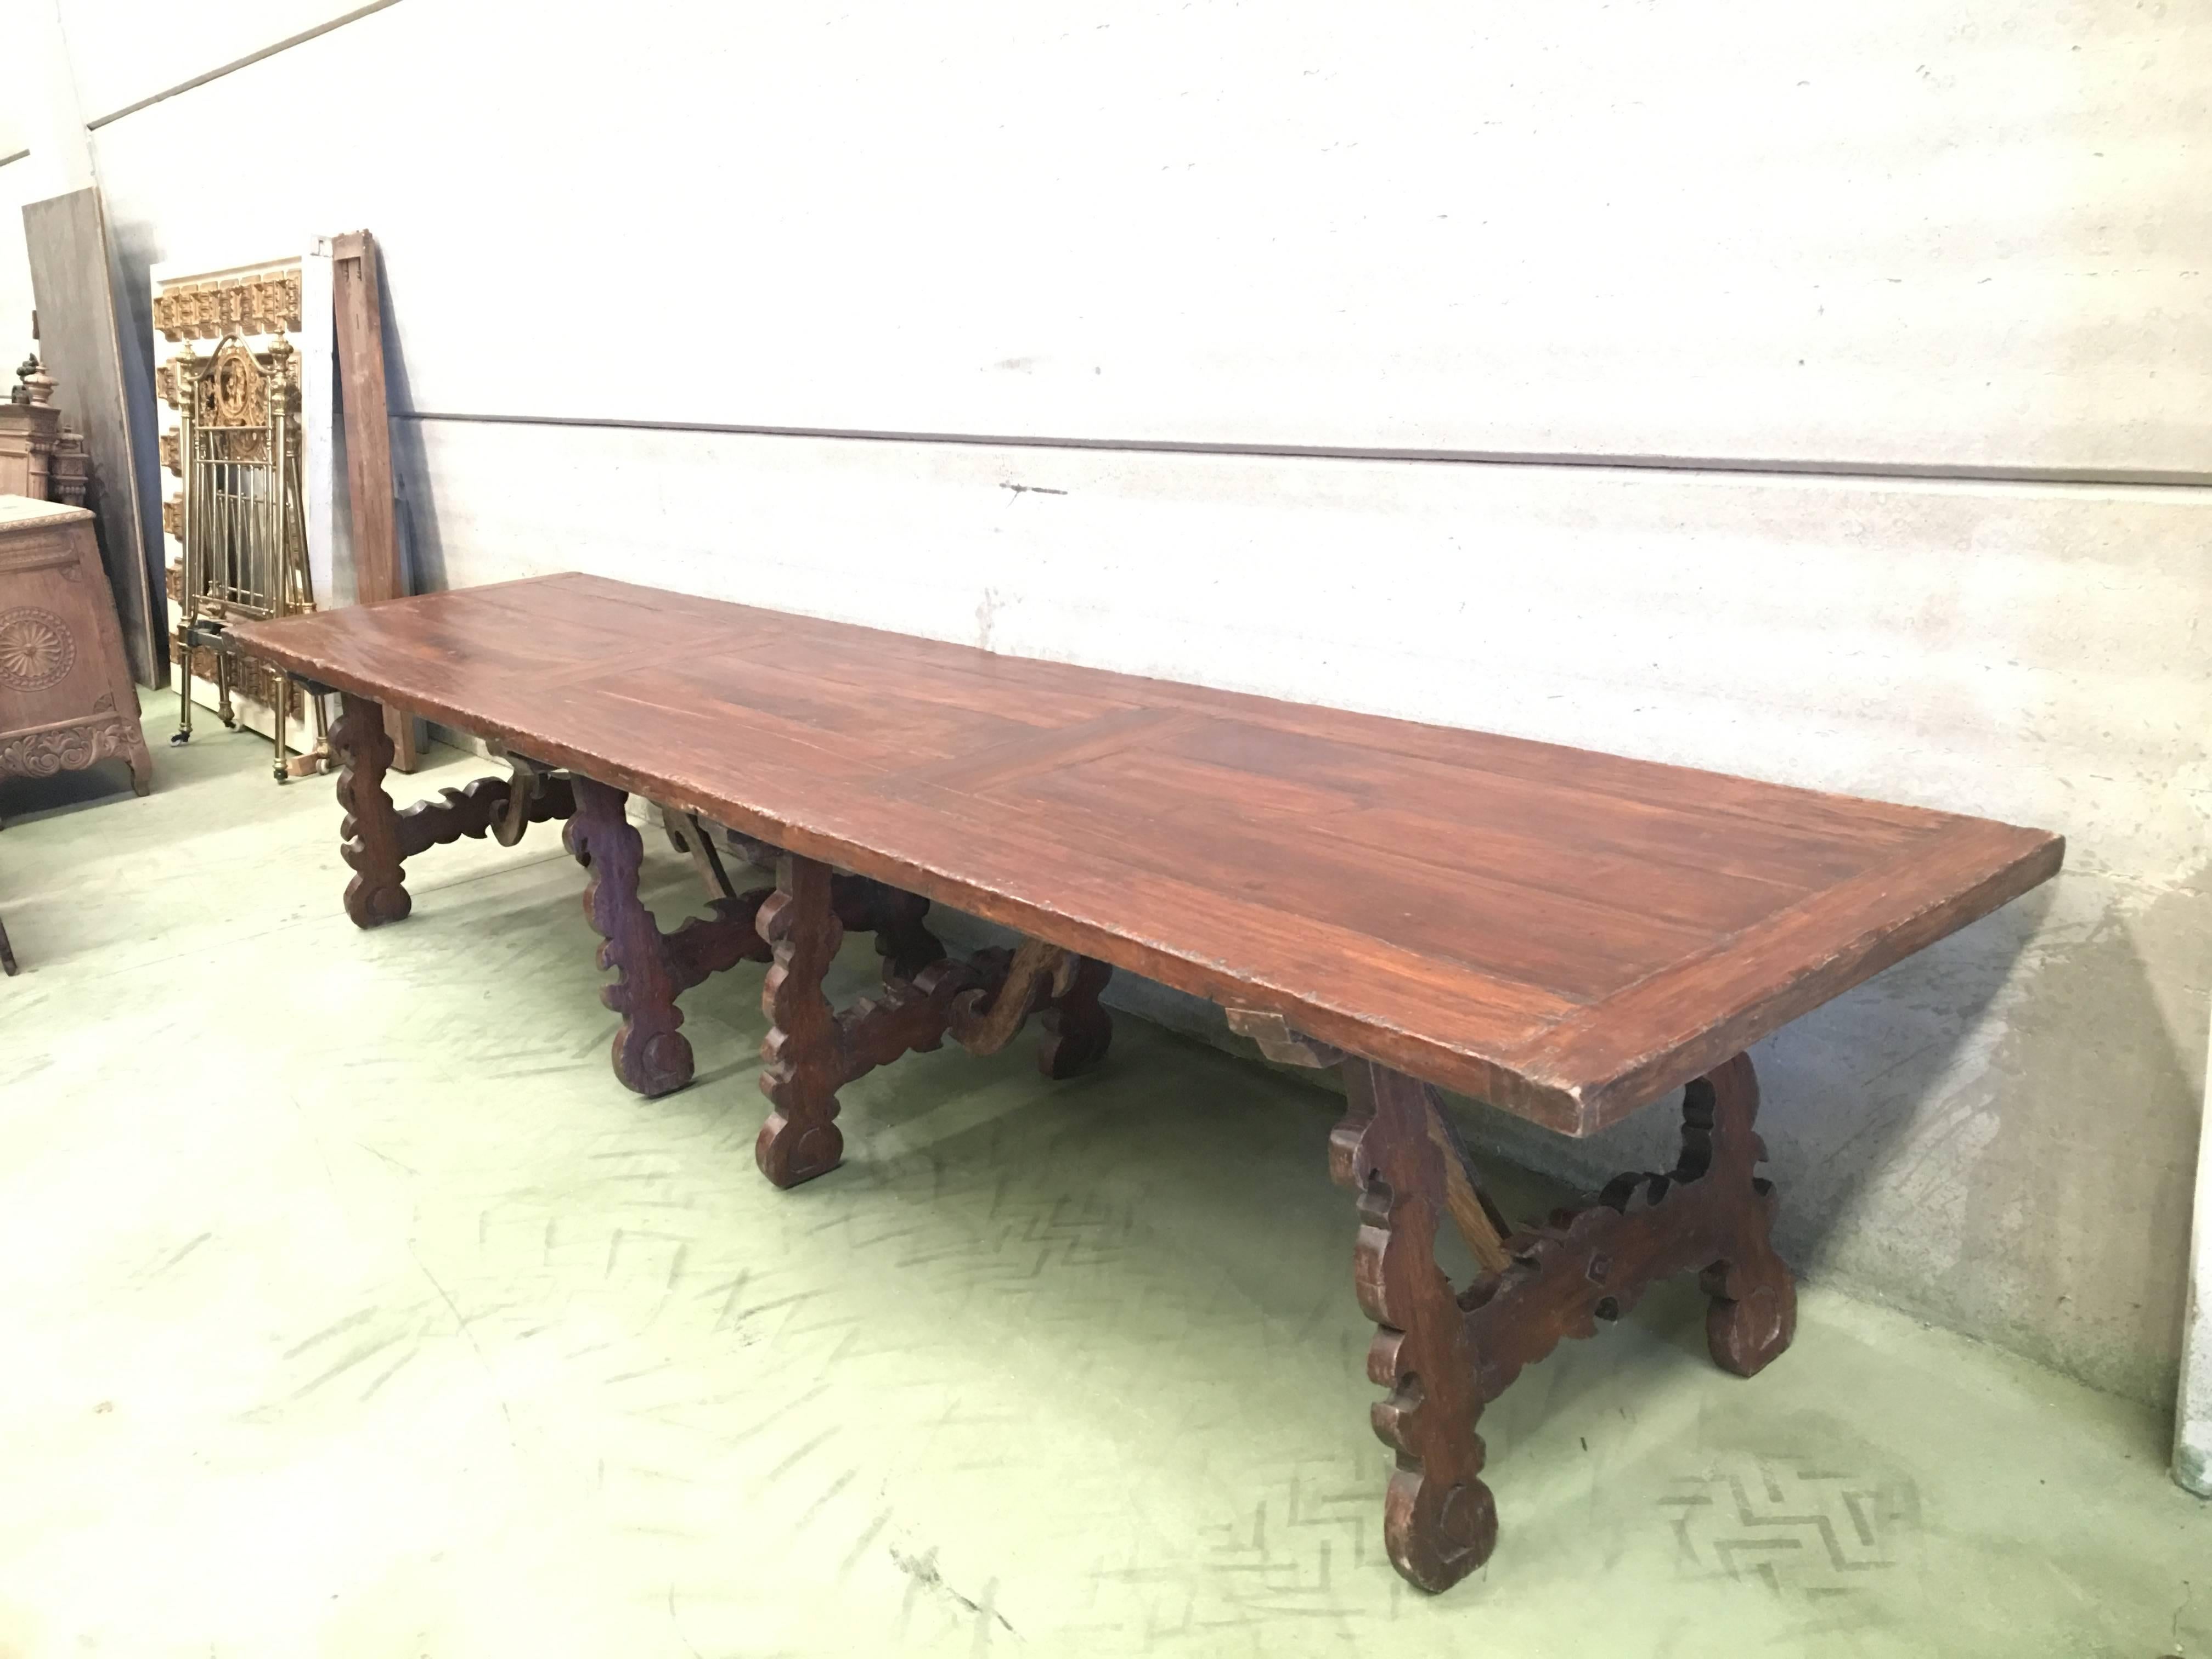 A monumental early 19th century Italian trestle table, having a rectangular framed solid walnut inset board top, resting on four hand-carved, classical lyre legs joined by four beautifully carved pair of wood S-scroll stretchers.

This table was